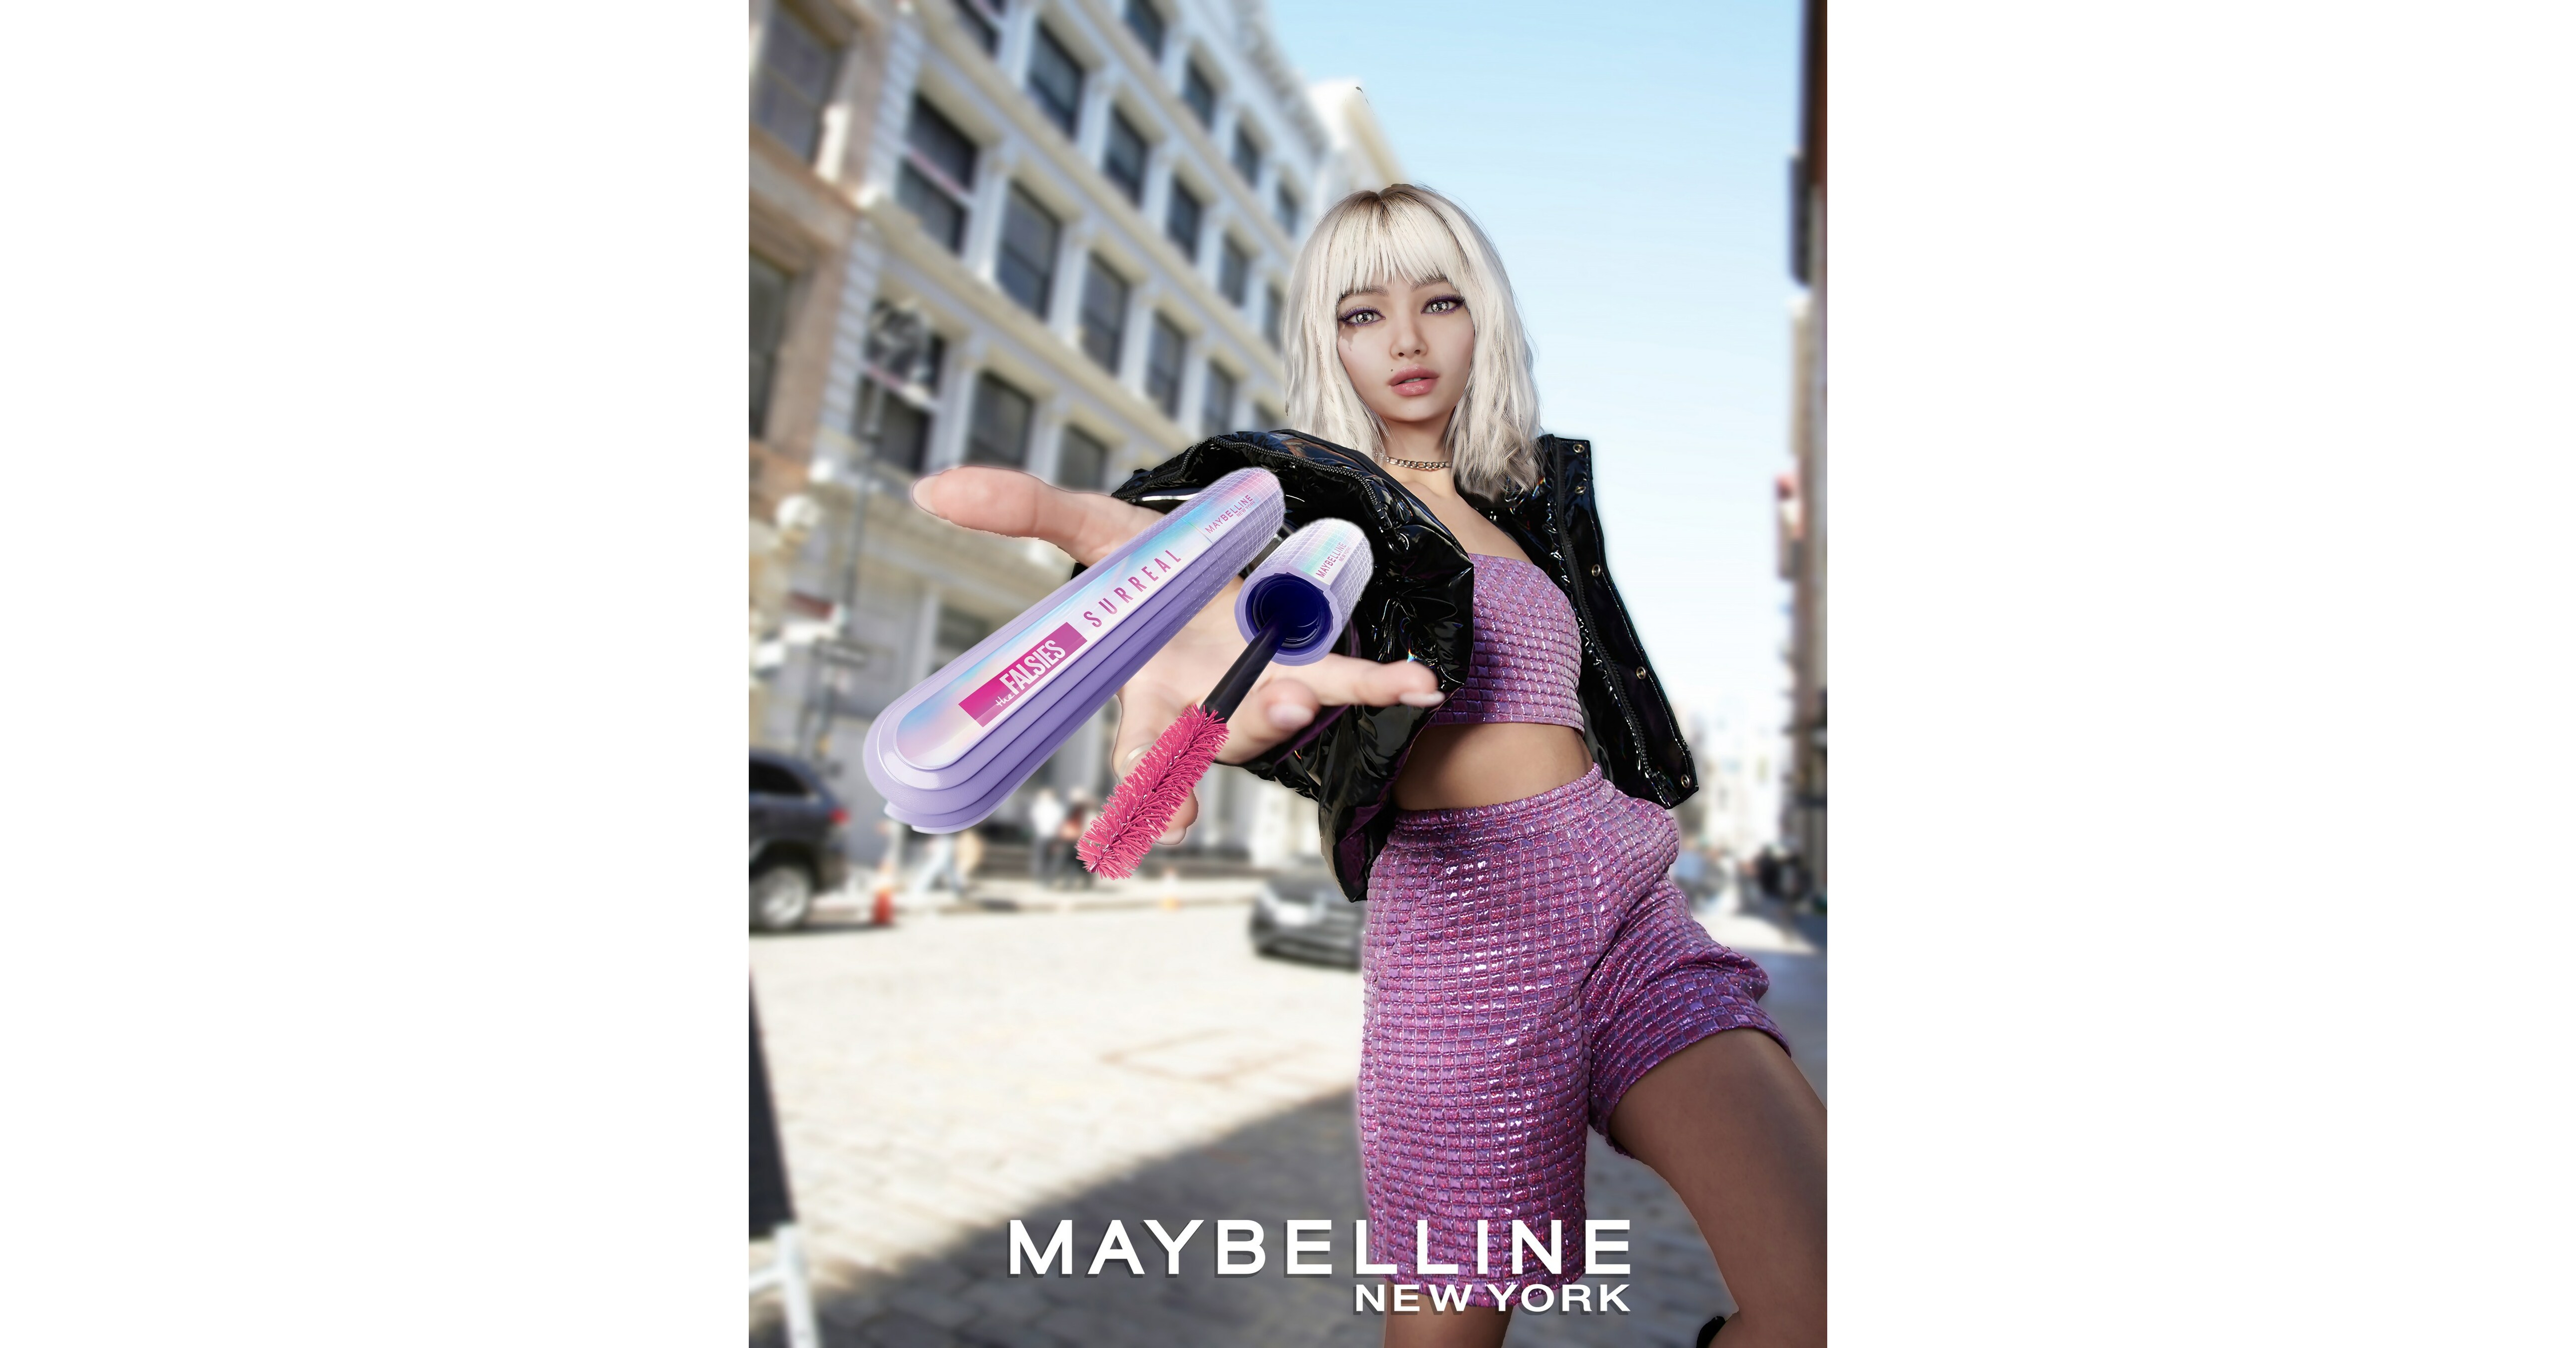 MAYBELLINE NEW YORK LAUNCHES THE FALSIES SURREAL EXTENSIONS MASCARA  FEATURING ITS FIRST-EVER AVATAR